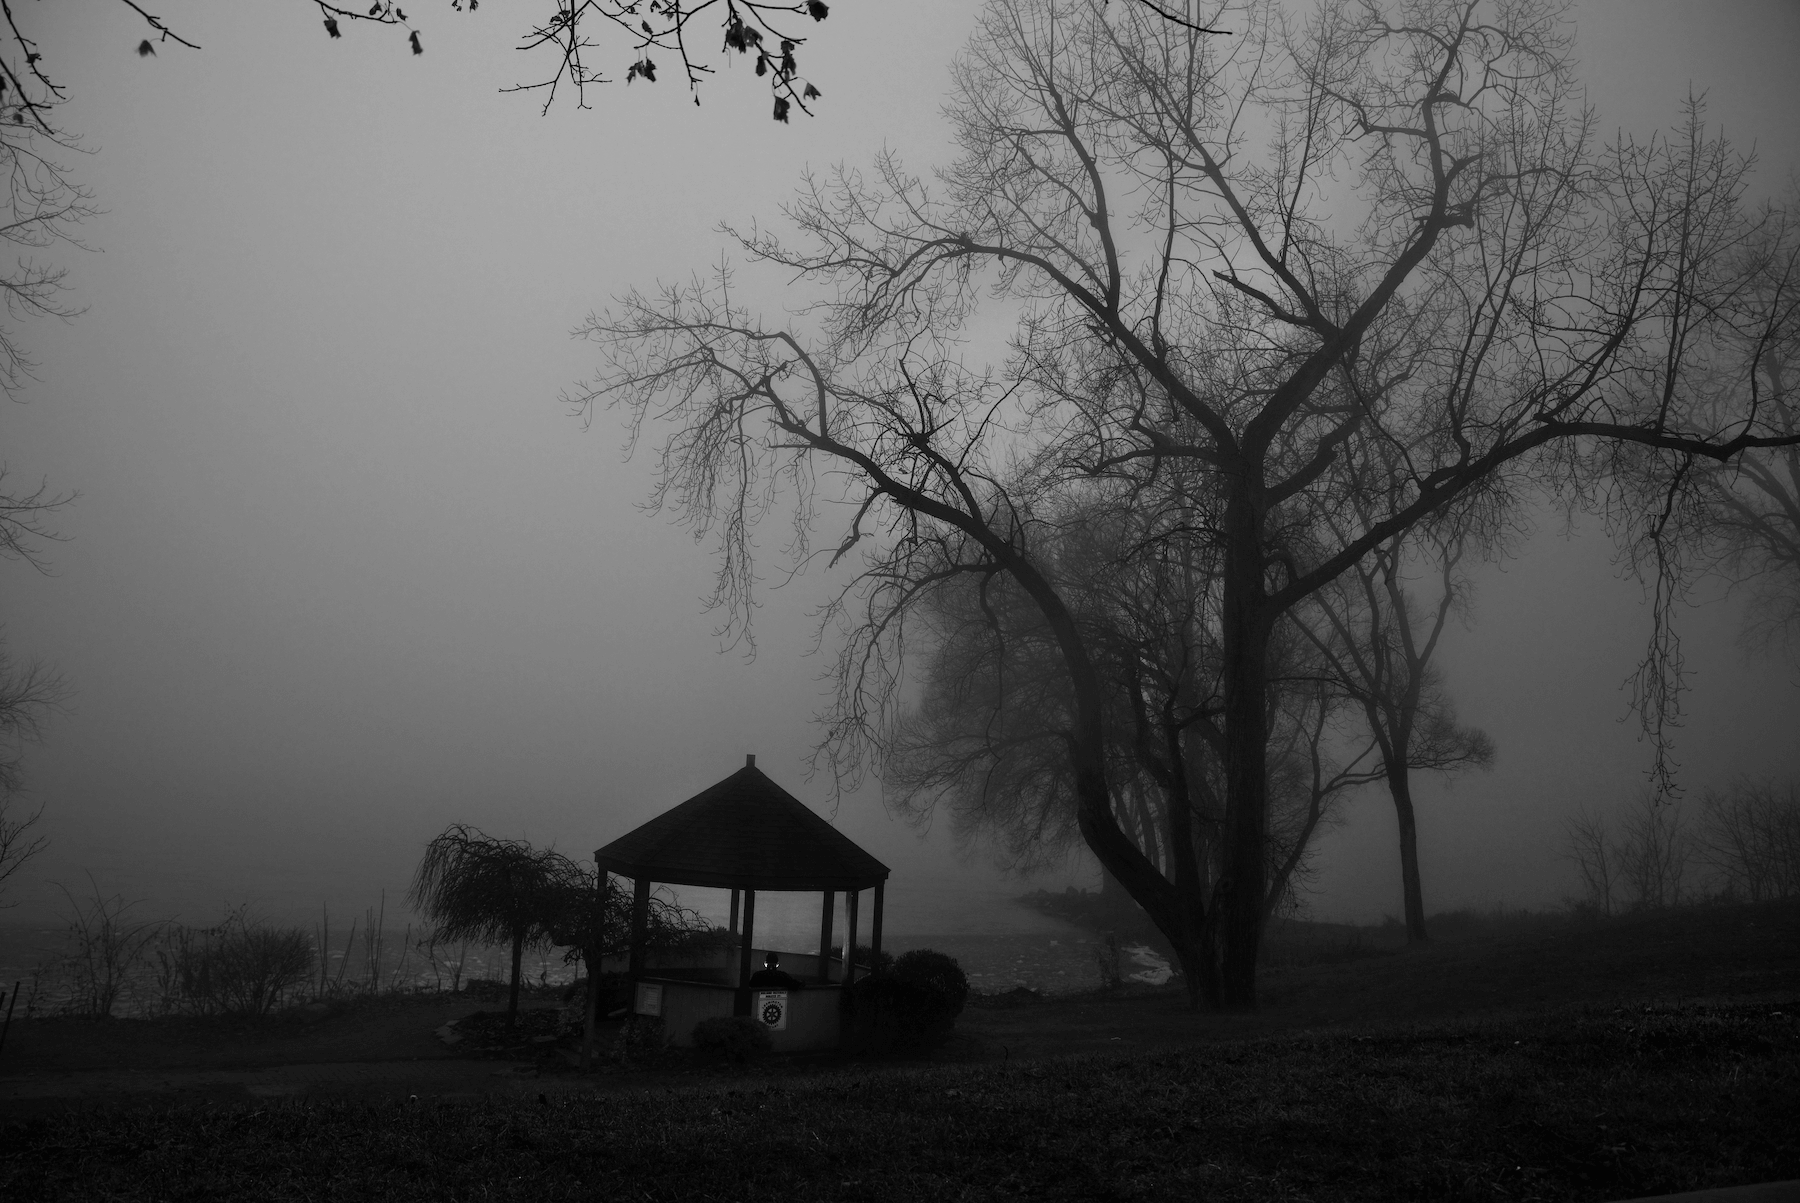 A spooky foggy hight with a scary tree and someone with a light in a gazebo